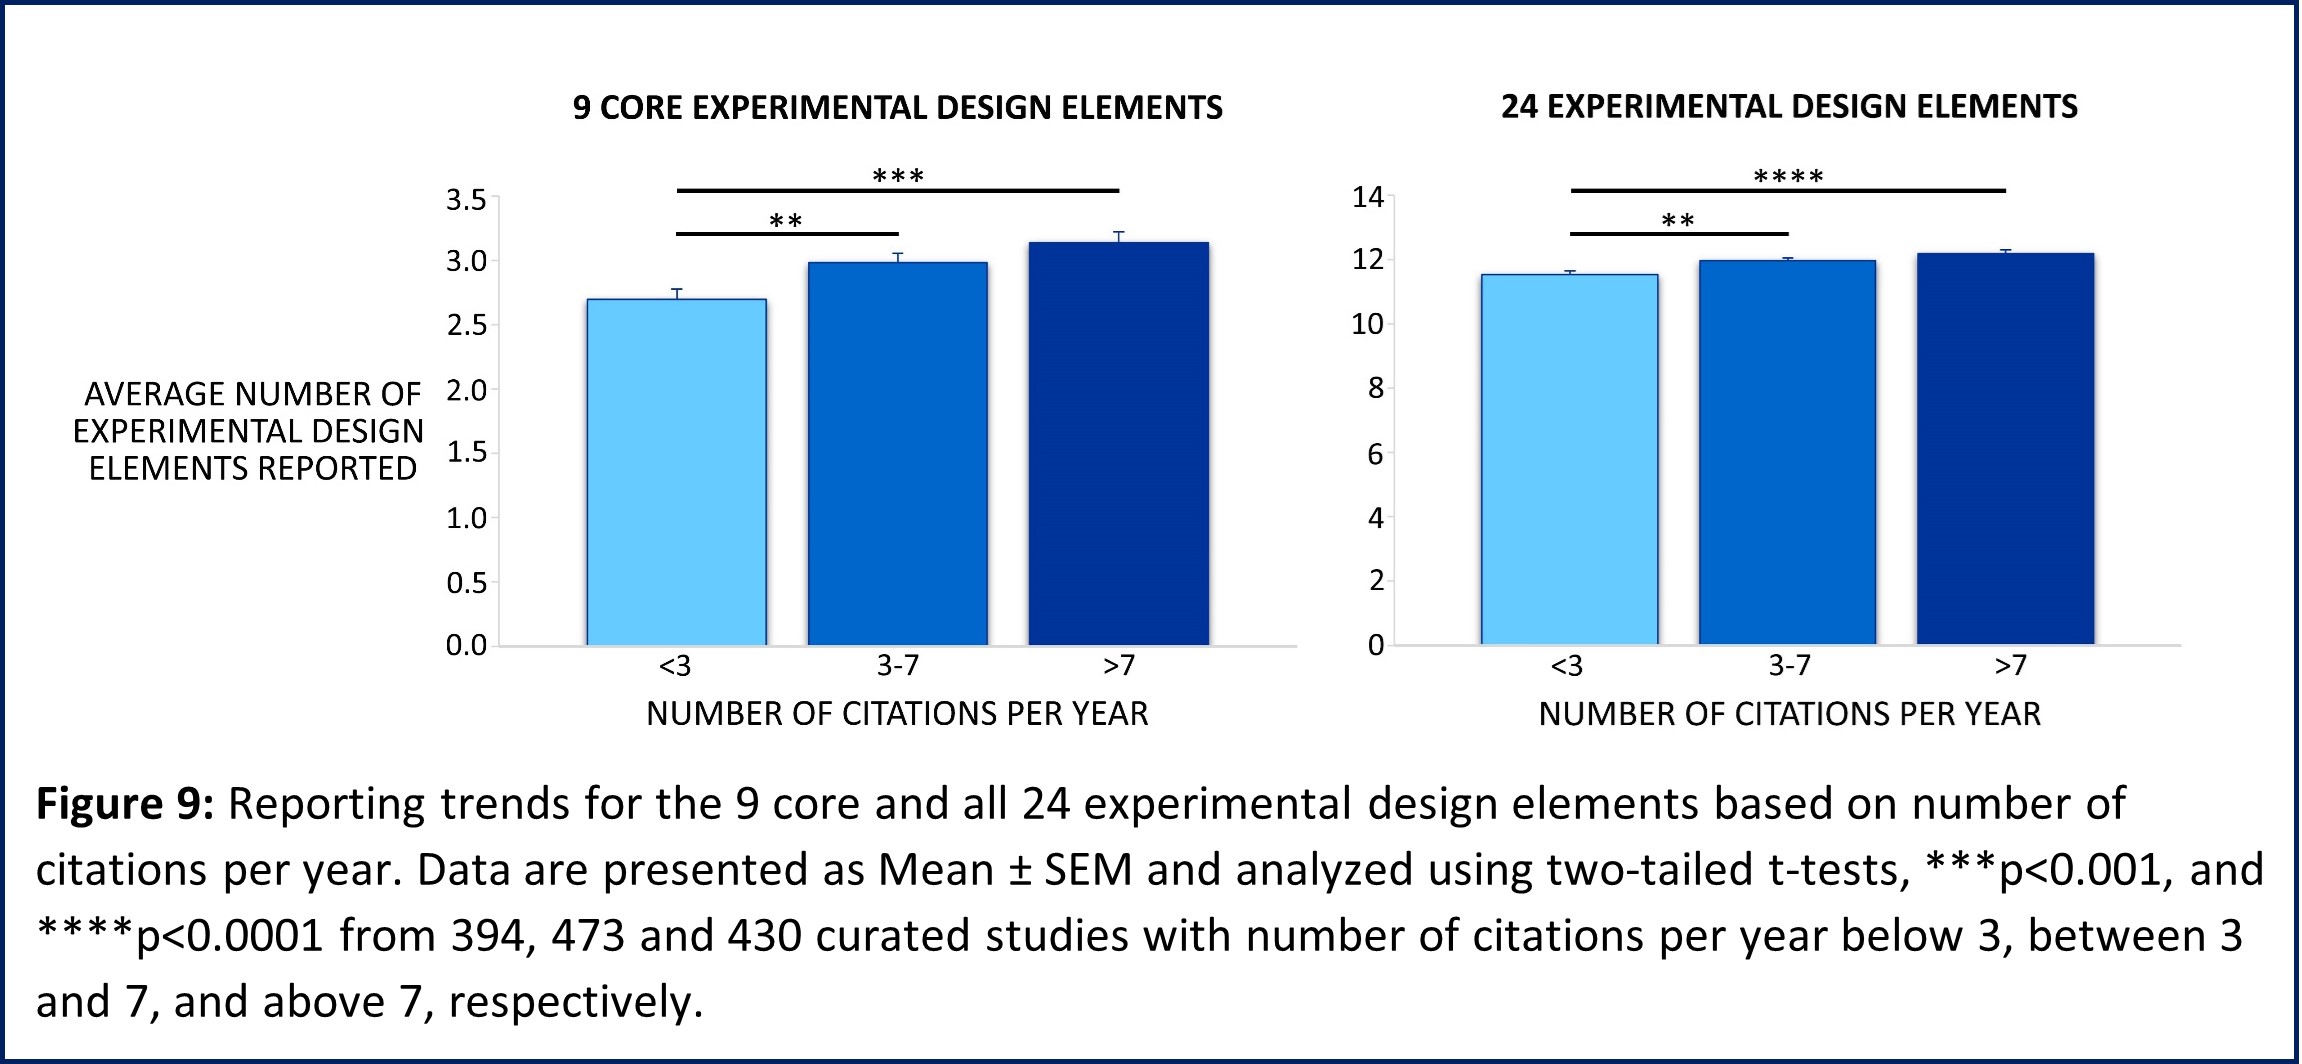 Graph shows reporting of 9 core experimental design elements based on citations per year